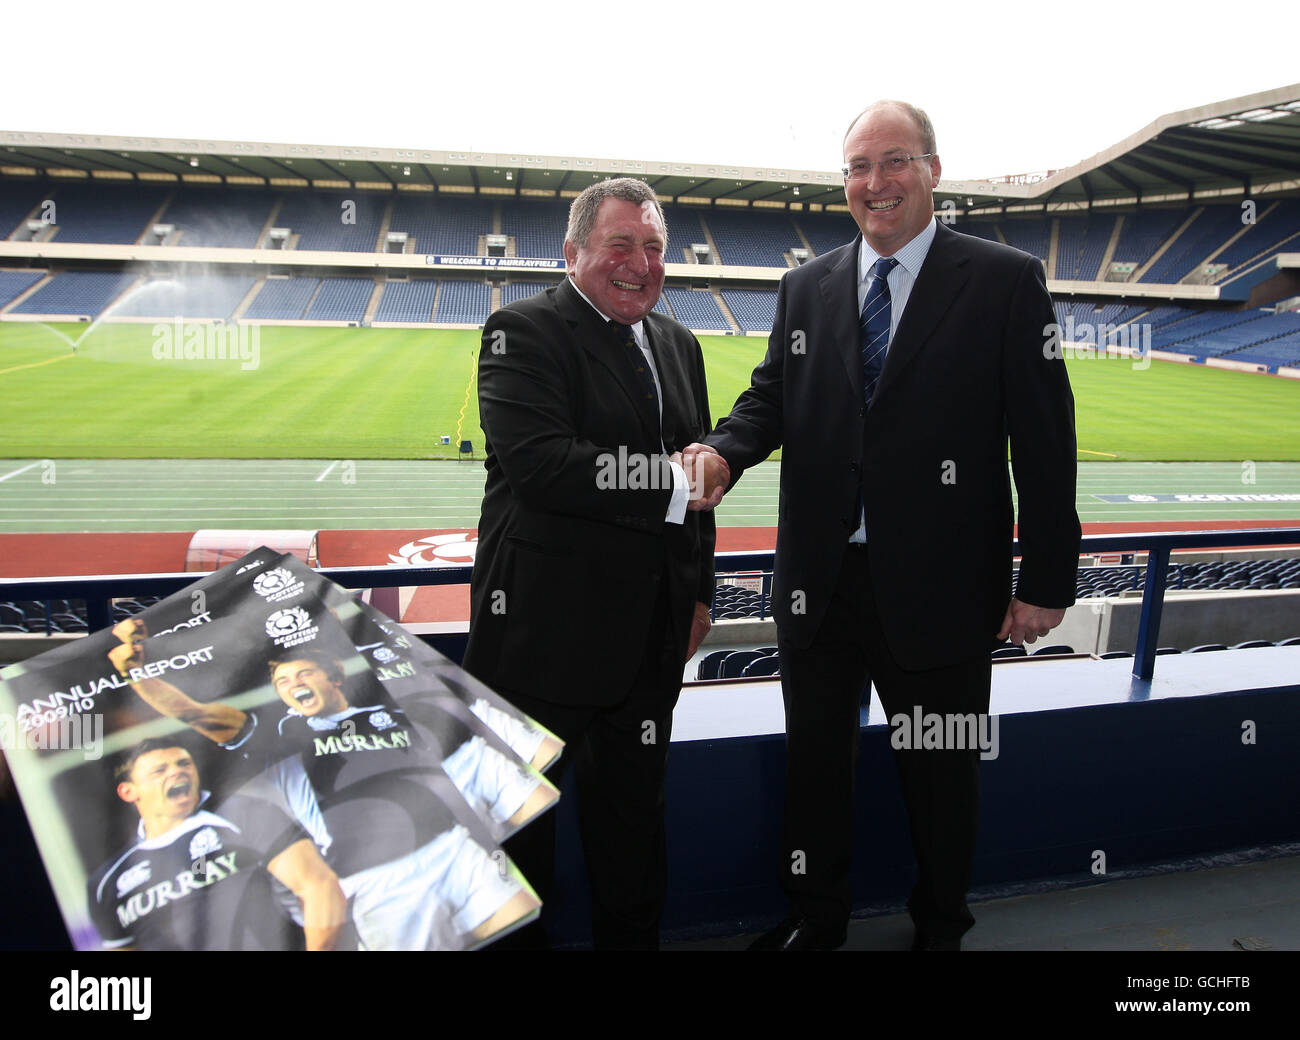 Ian McLauchlan is welcomed as President of the Scottish Rugby Union by Chief Executive Gordon McKie during the AGM at Murrayfield, Edinburgh. Stock Photo